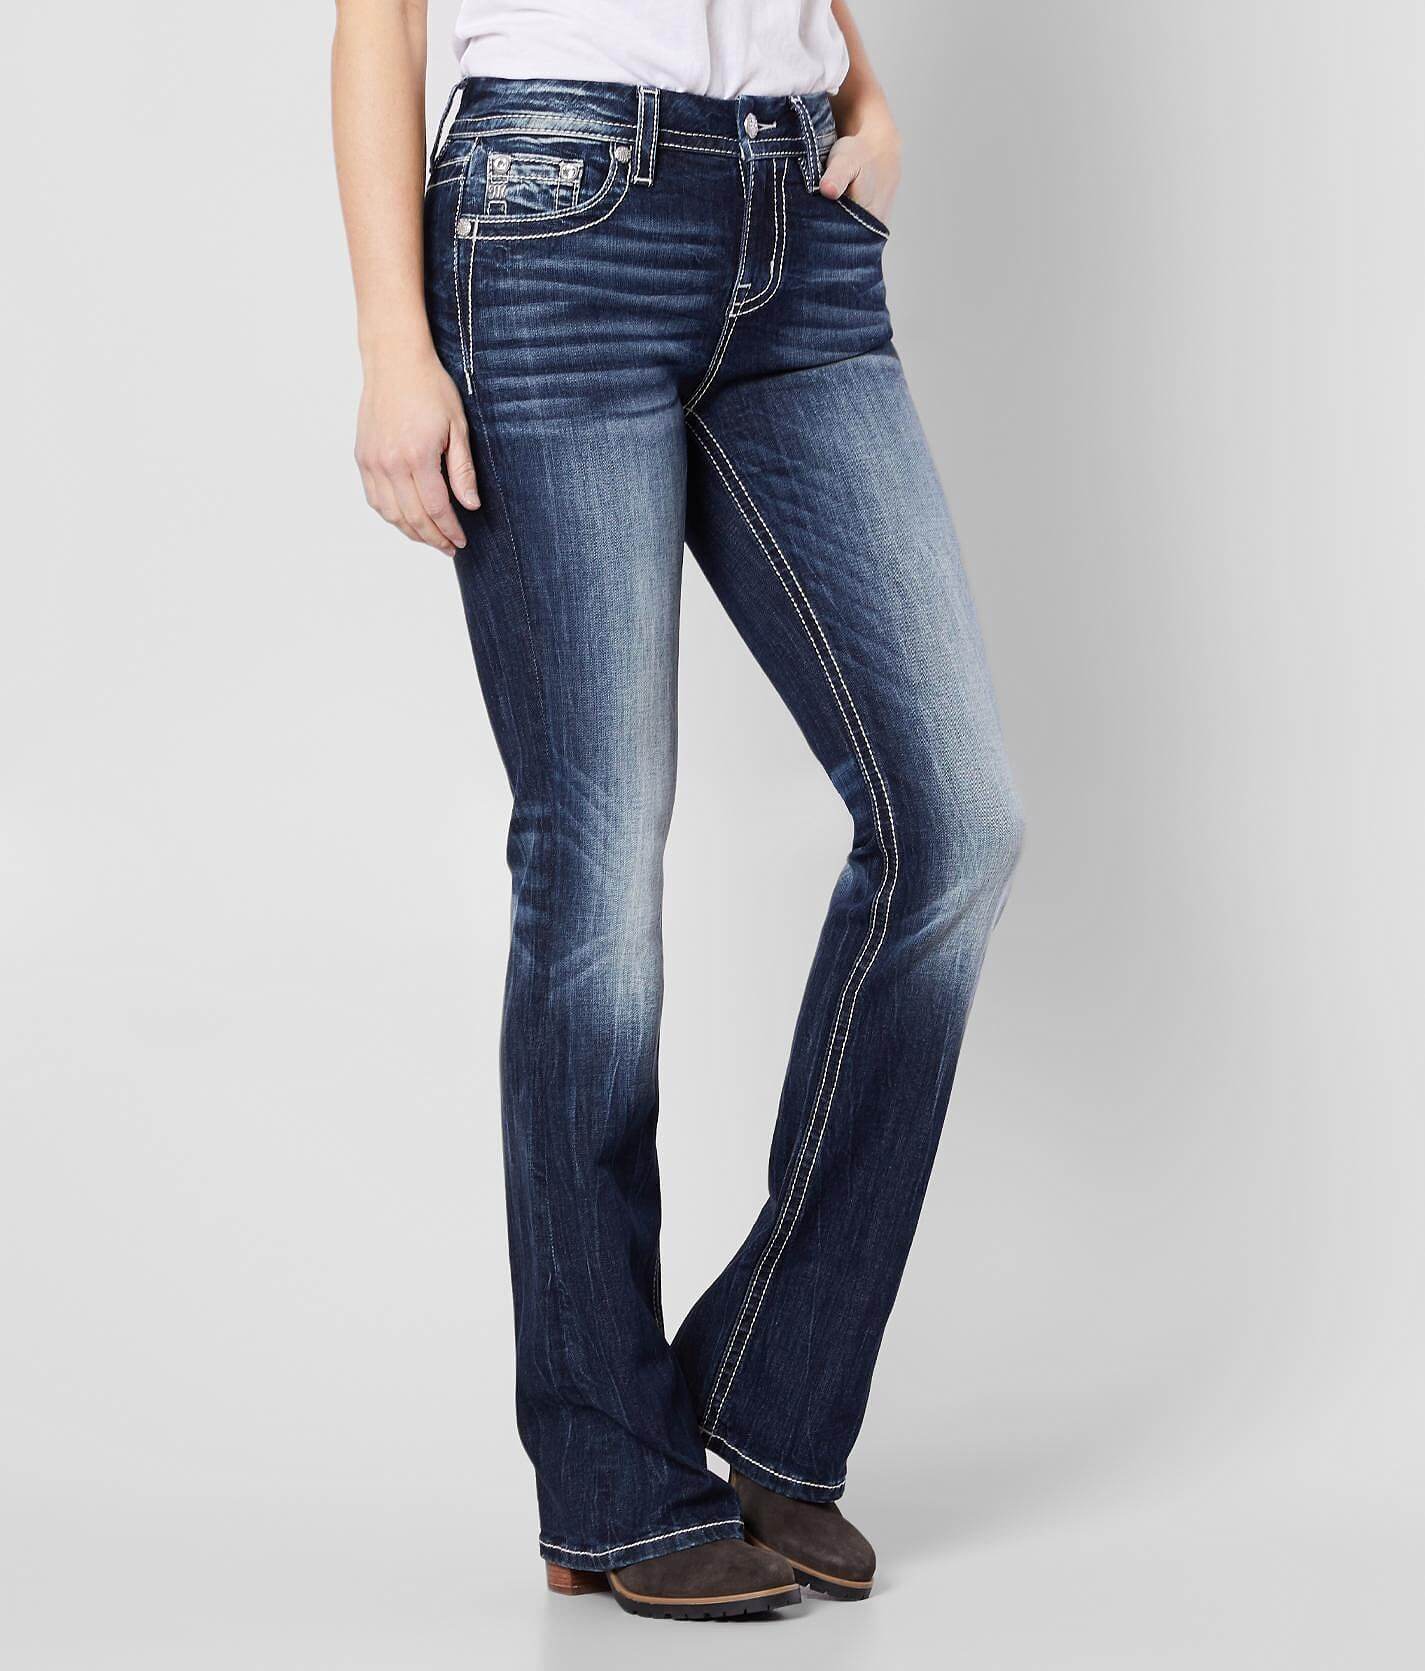 miss me jeans womens